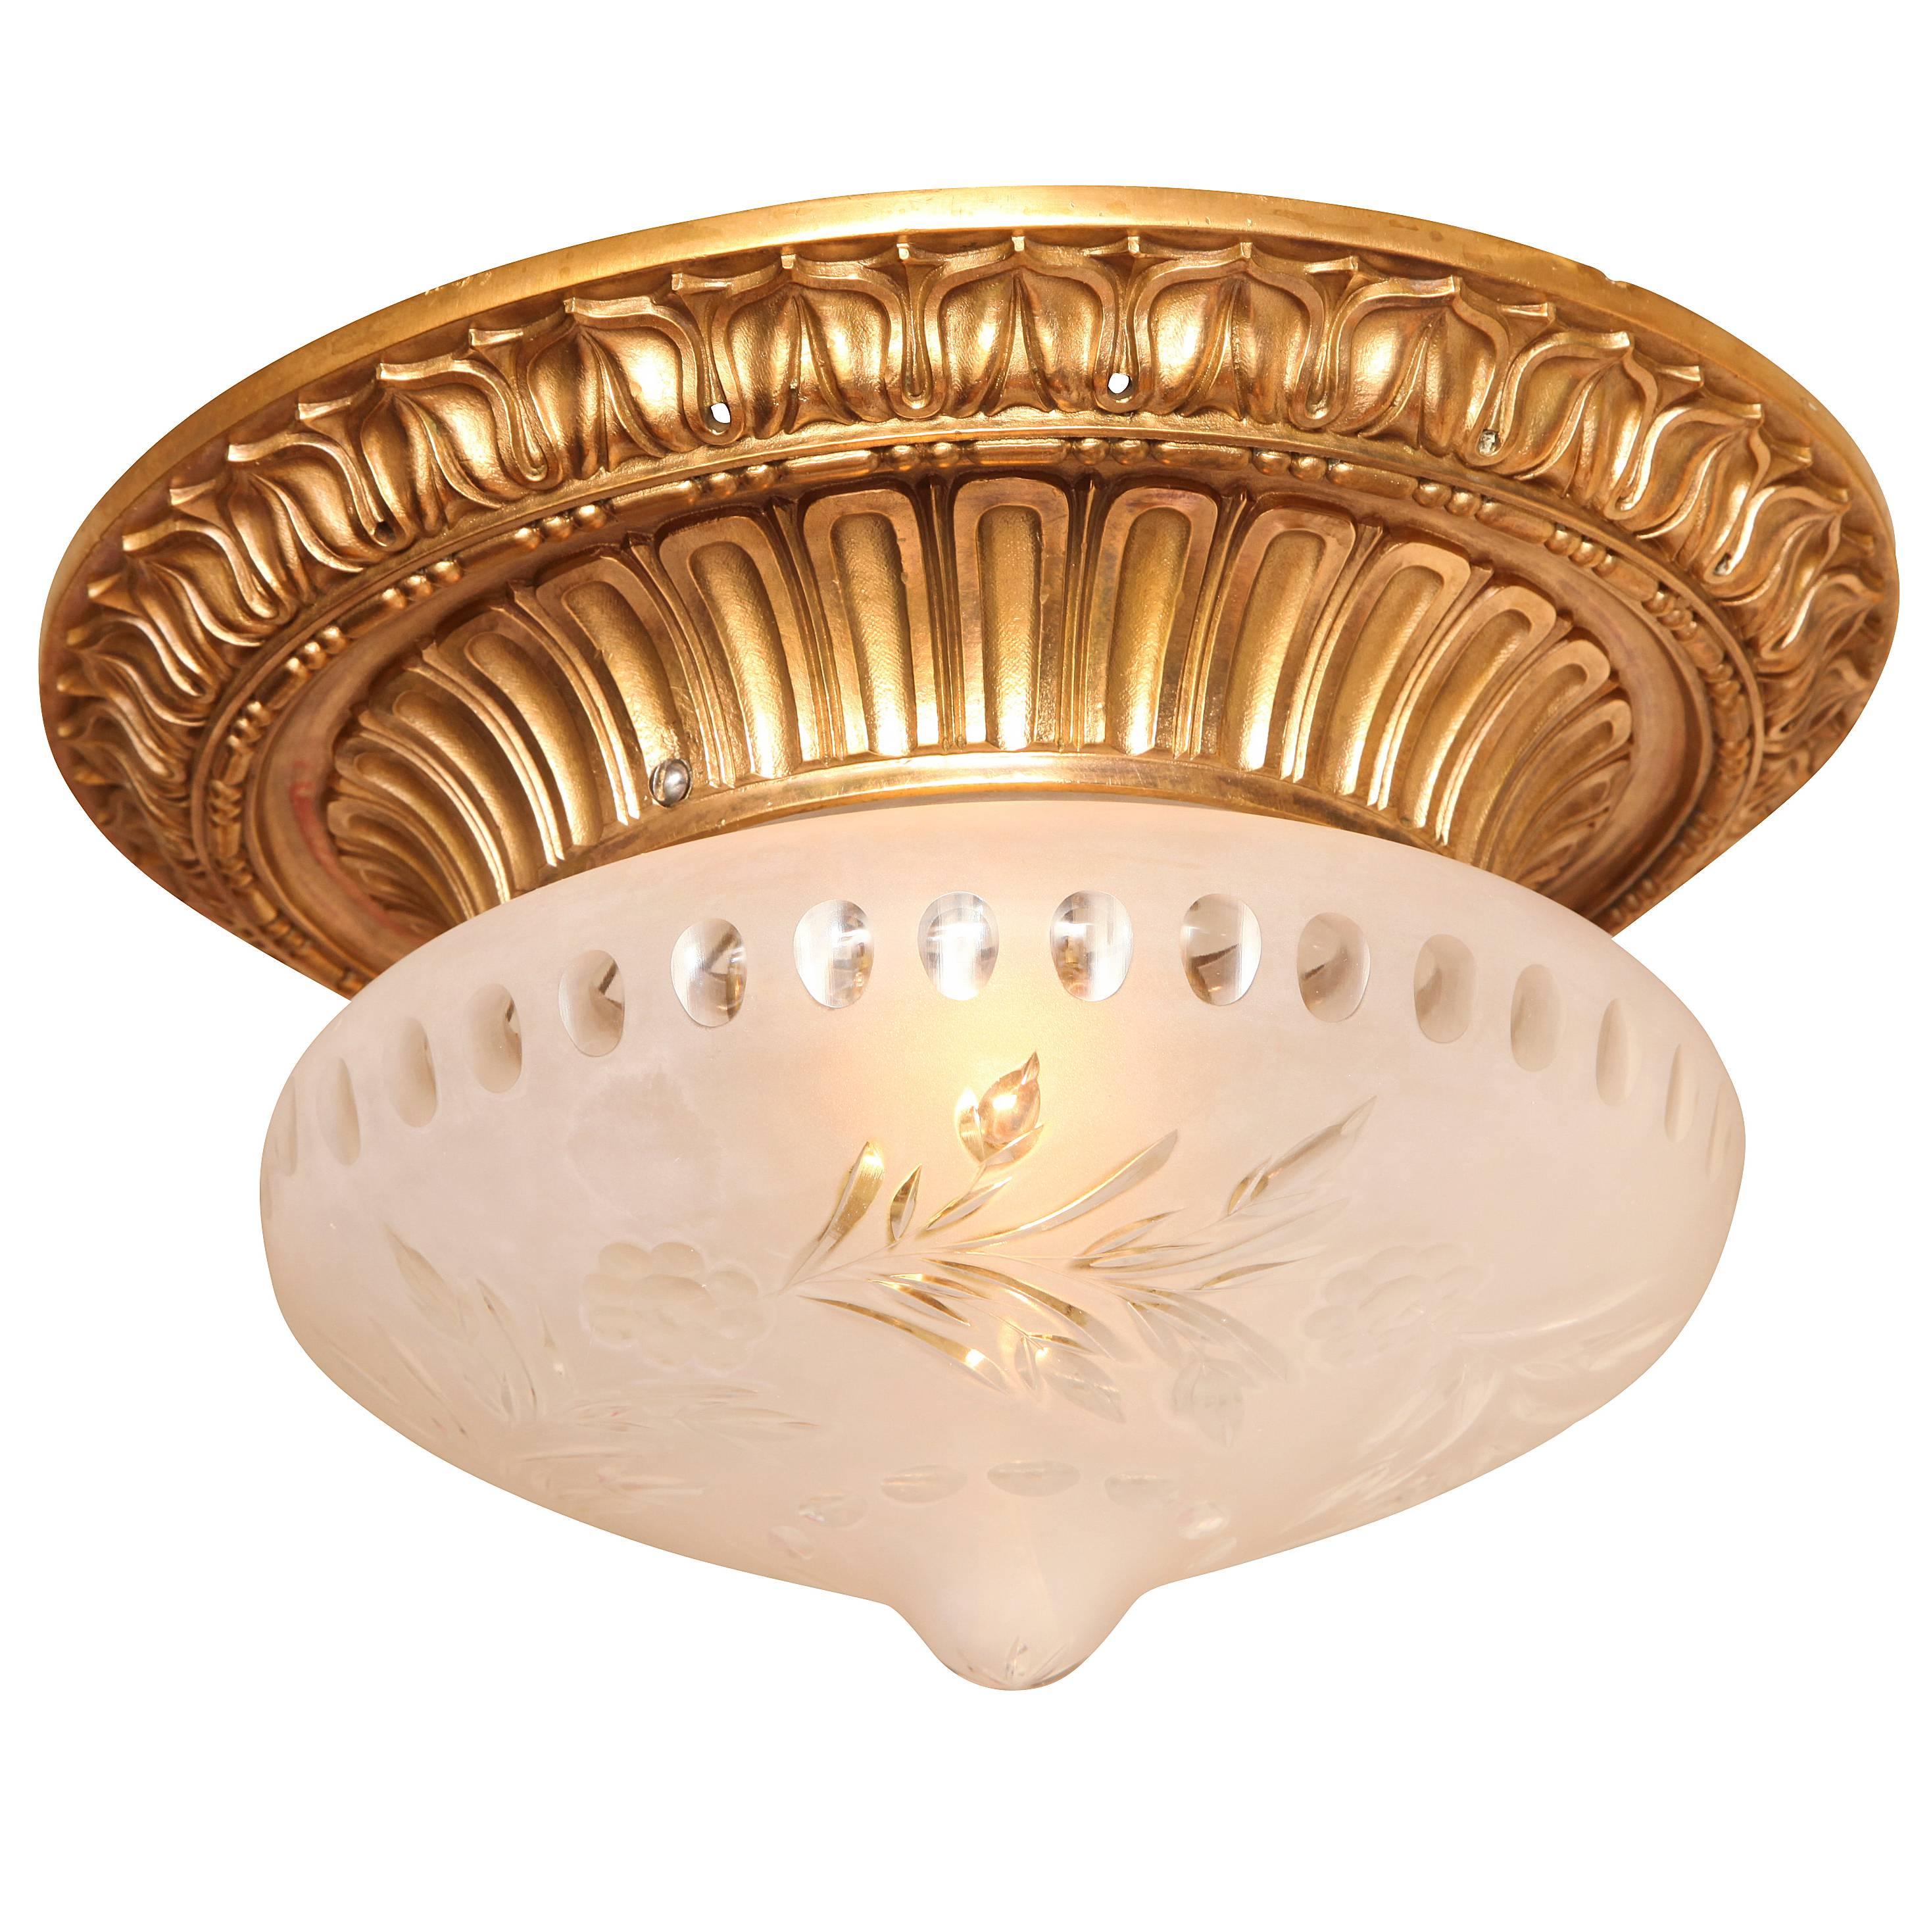 A Bronze Flush Mounted Ceiling Light by E.F Caldwell